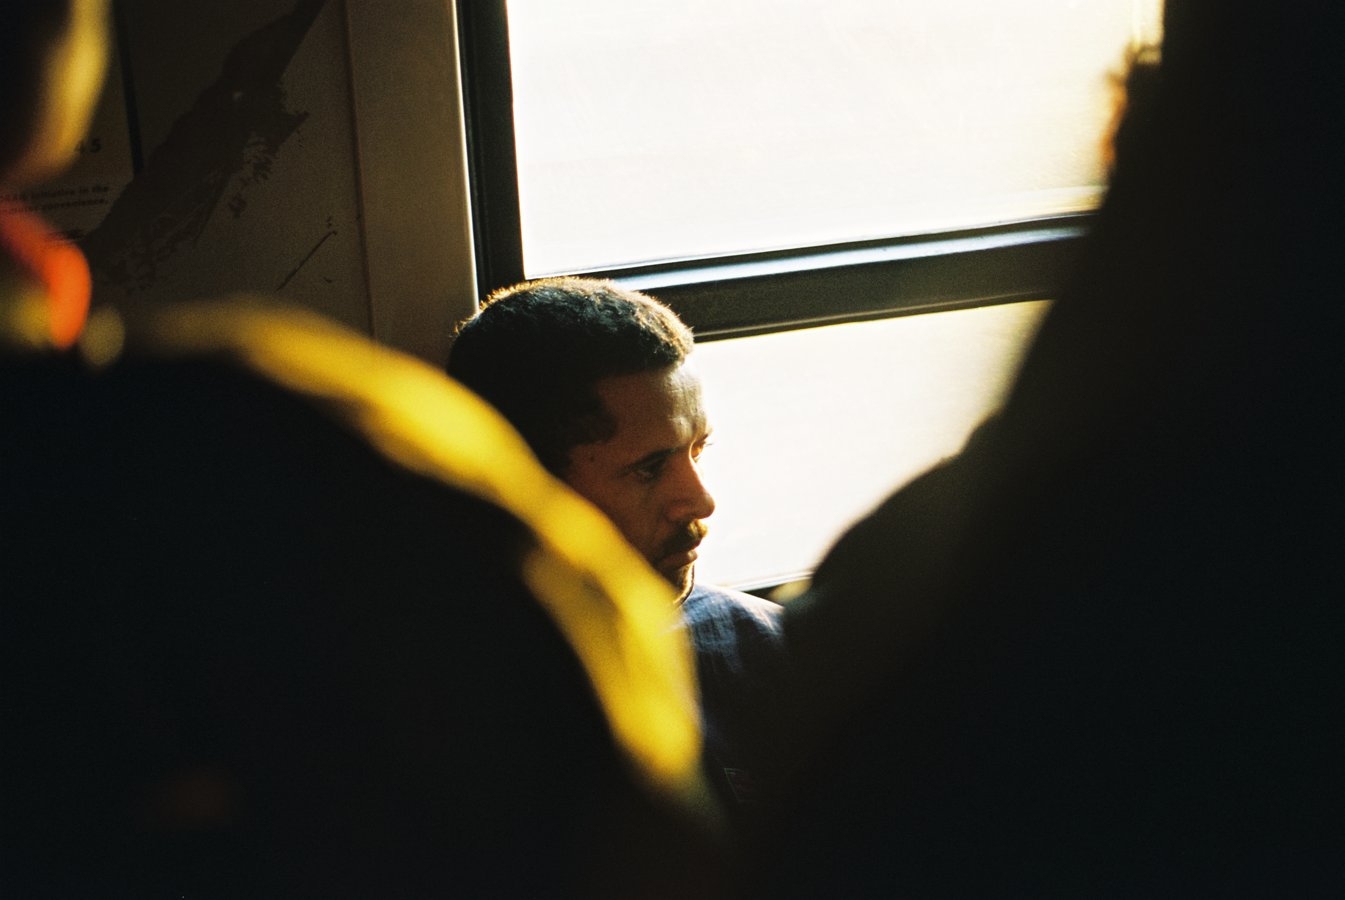 On board the early mornings train from Heideveld station (Cape Flats) to the city. Cape Town, 2003